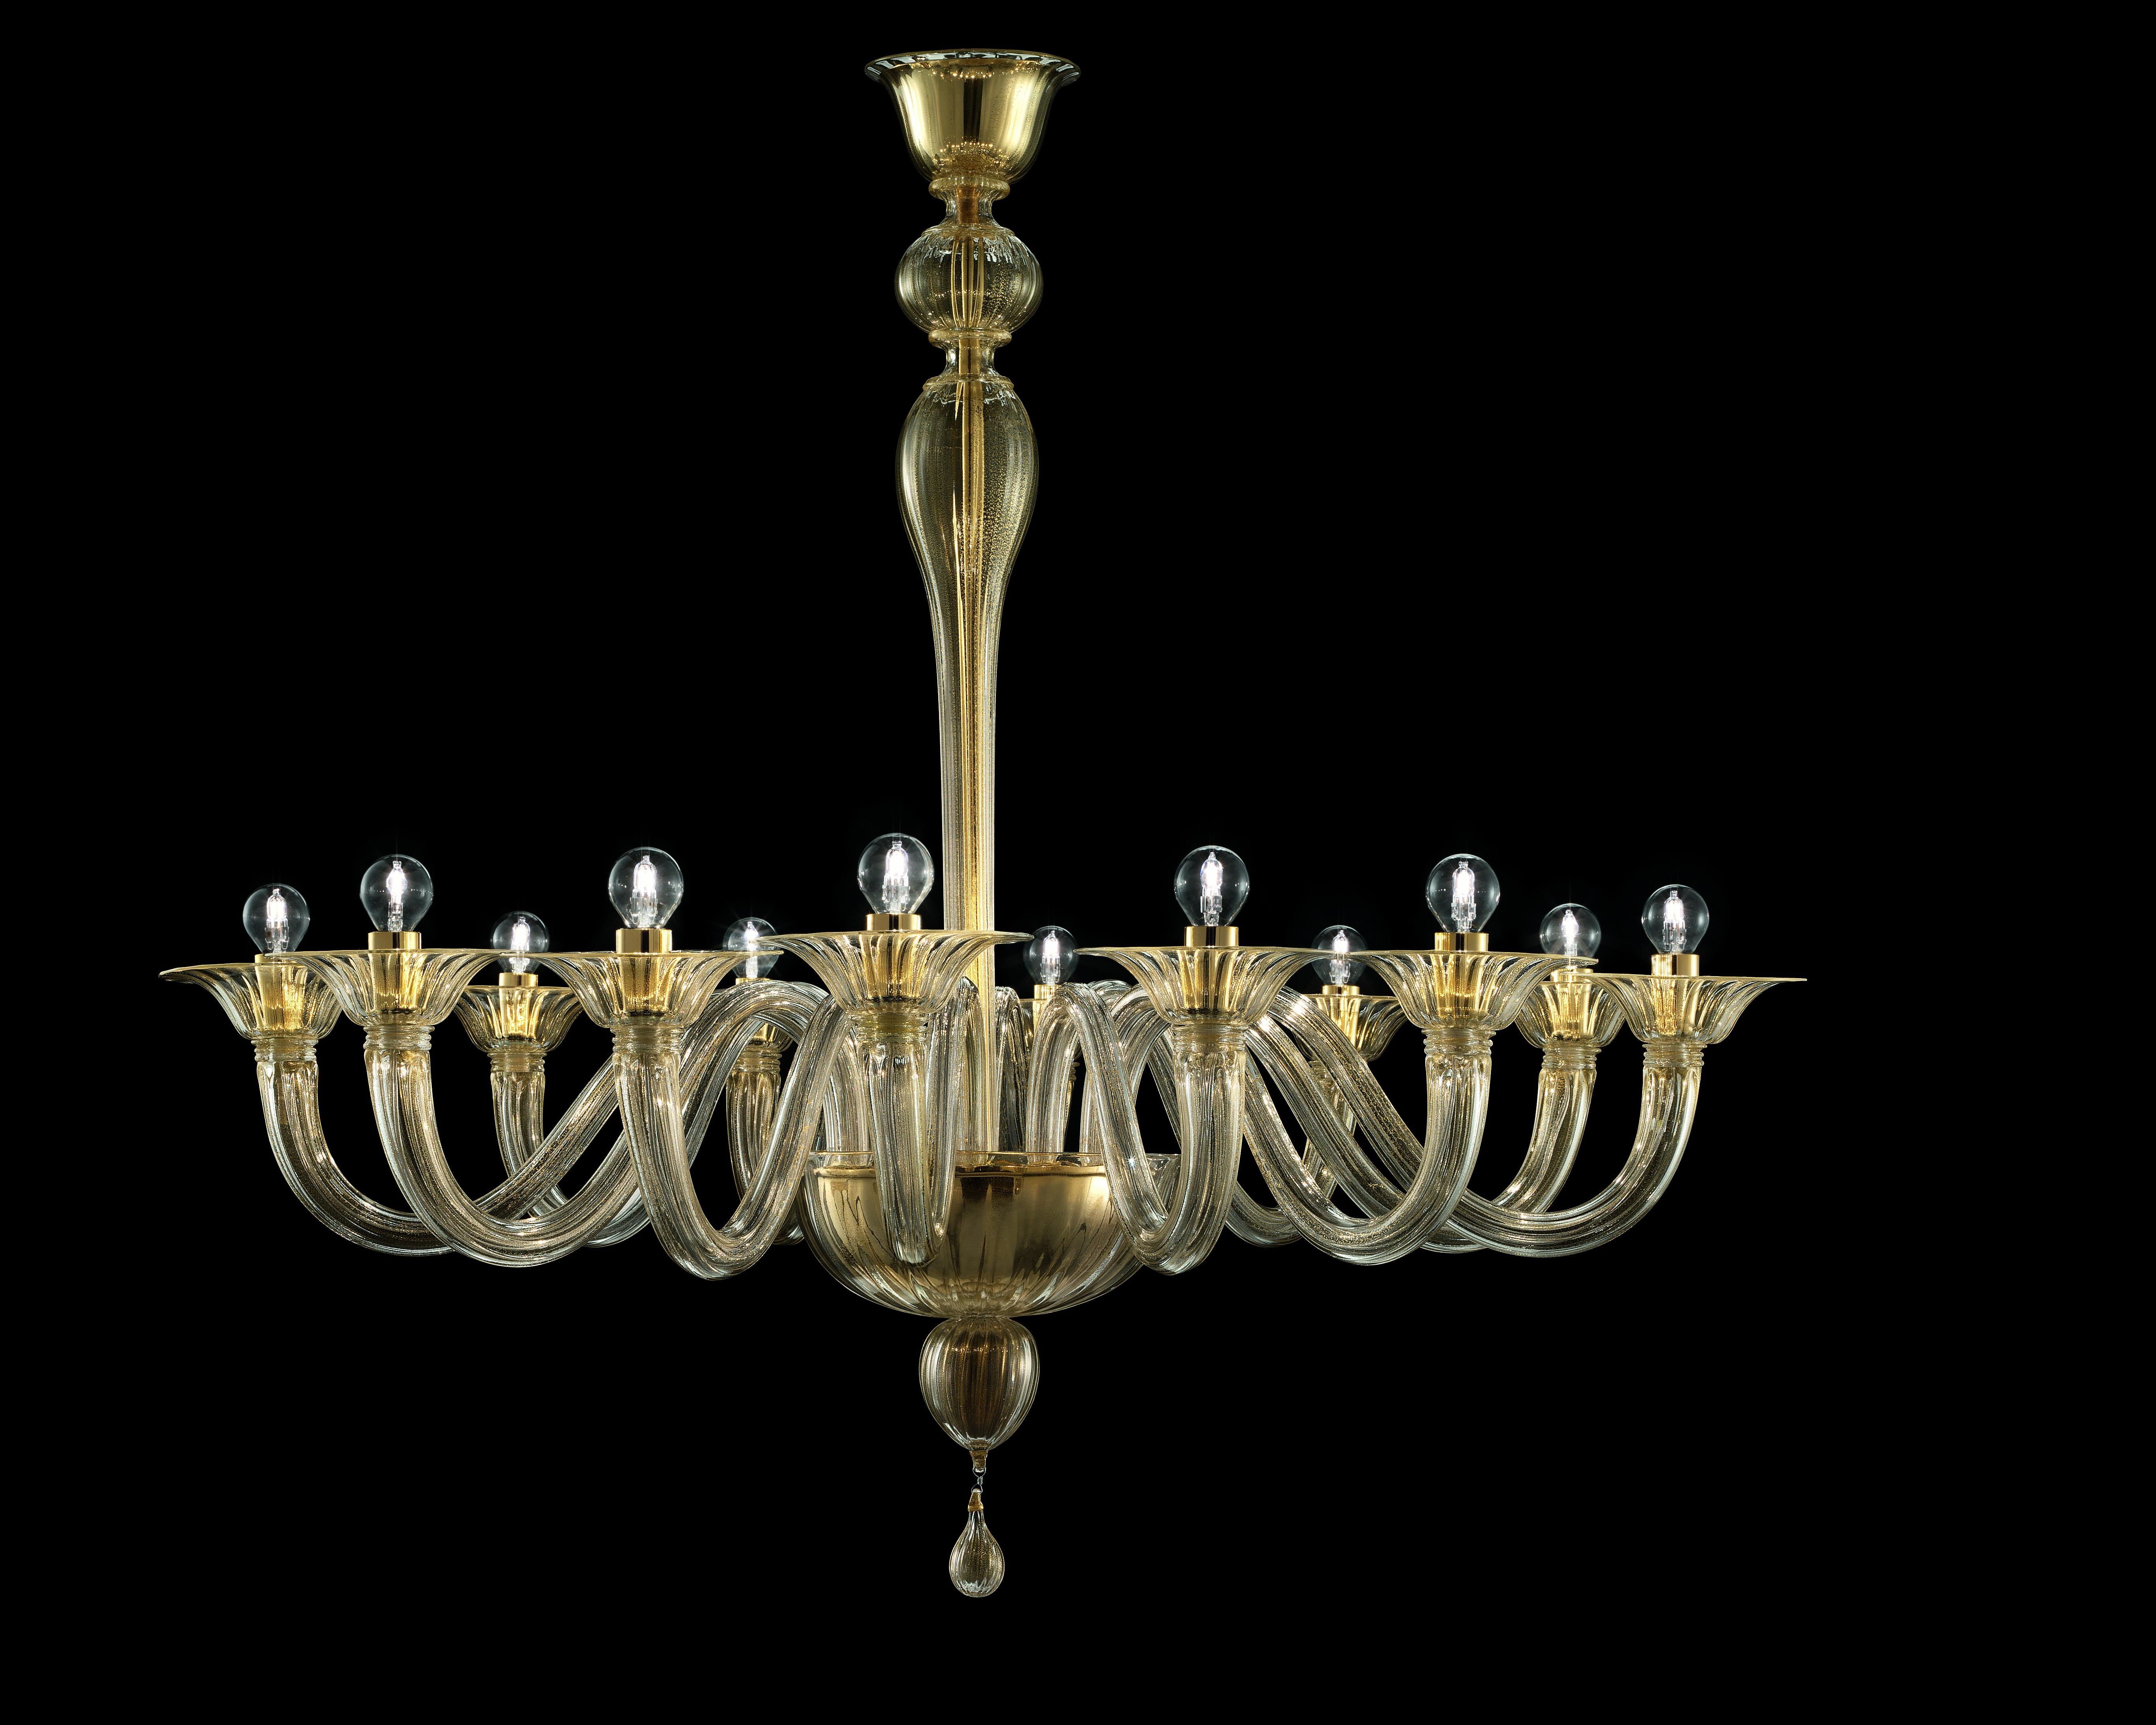 Modern Valiant 5507 12 Chandelier in Gold Glass, by Barovier&Toso